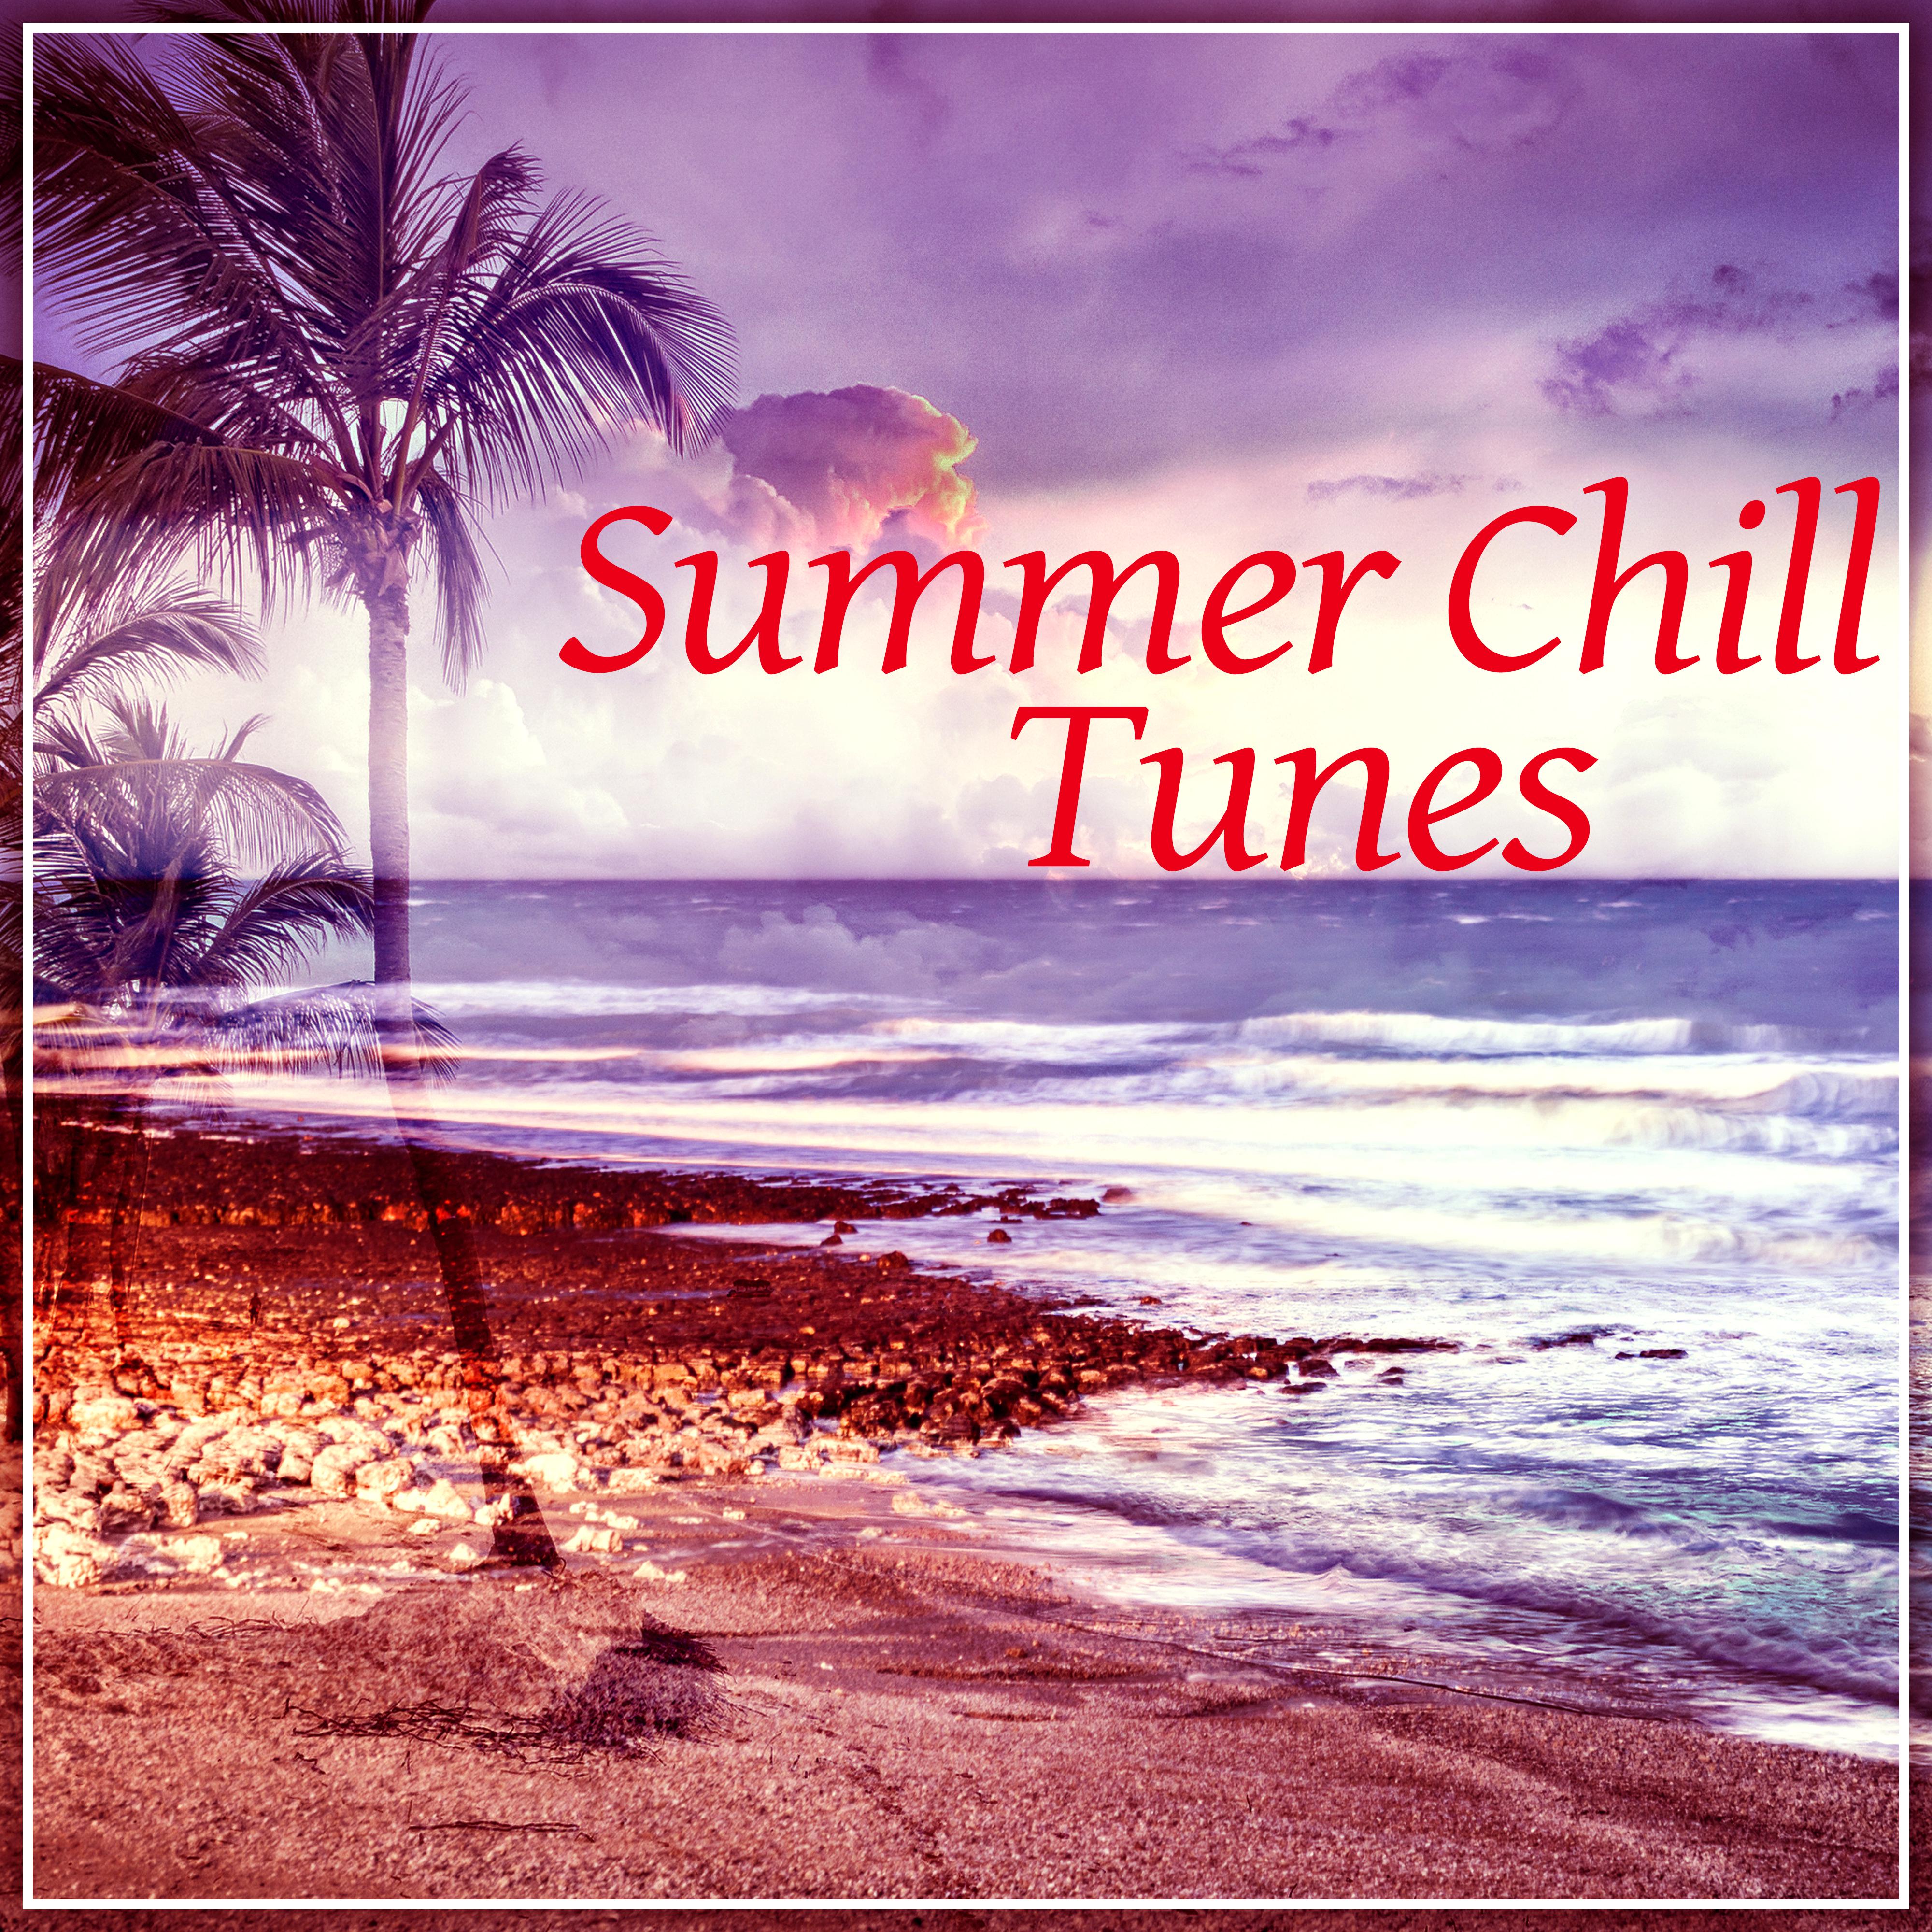 Summer Chill Tunes - Sunshine, Positive Energy, Chill Out Music, Summer Solstice, Chill Tone, Holiday Chill Out